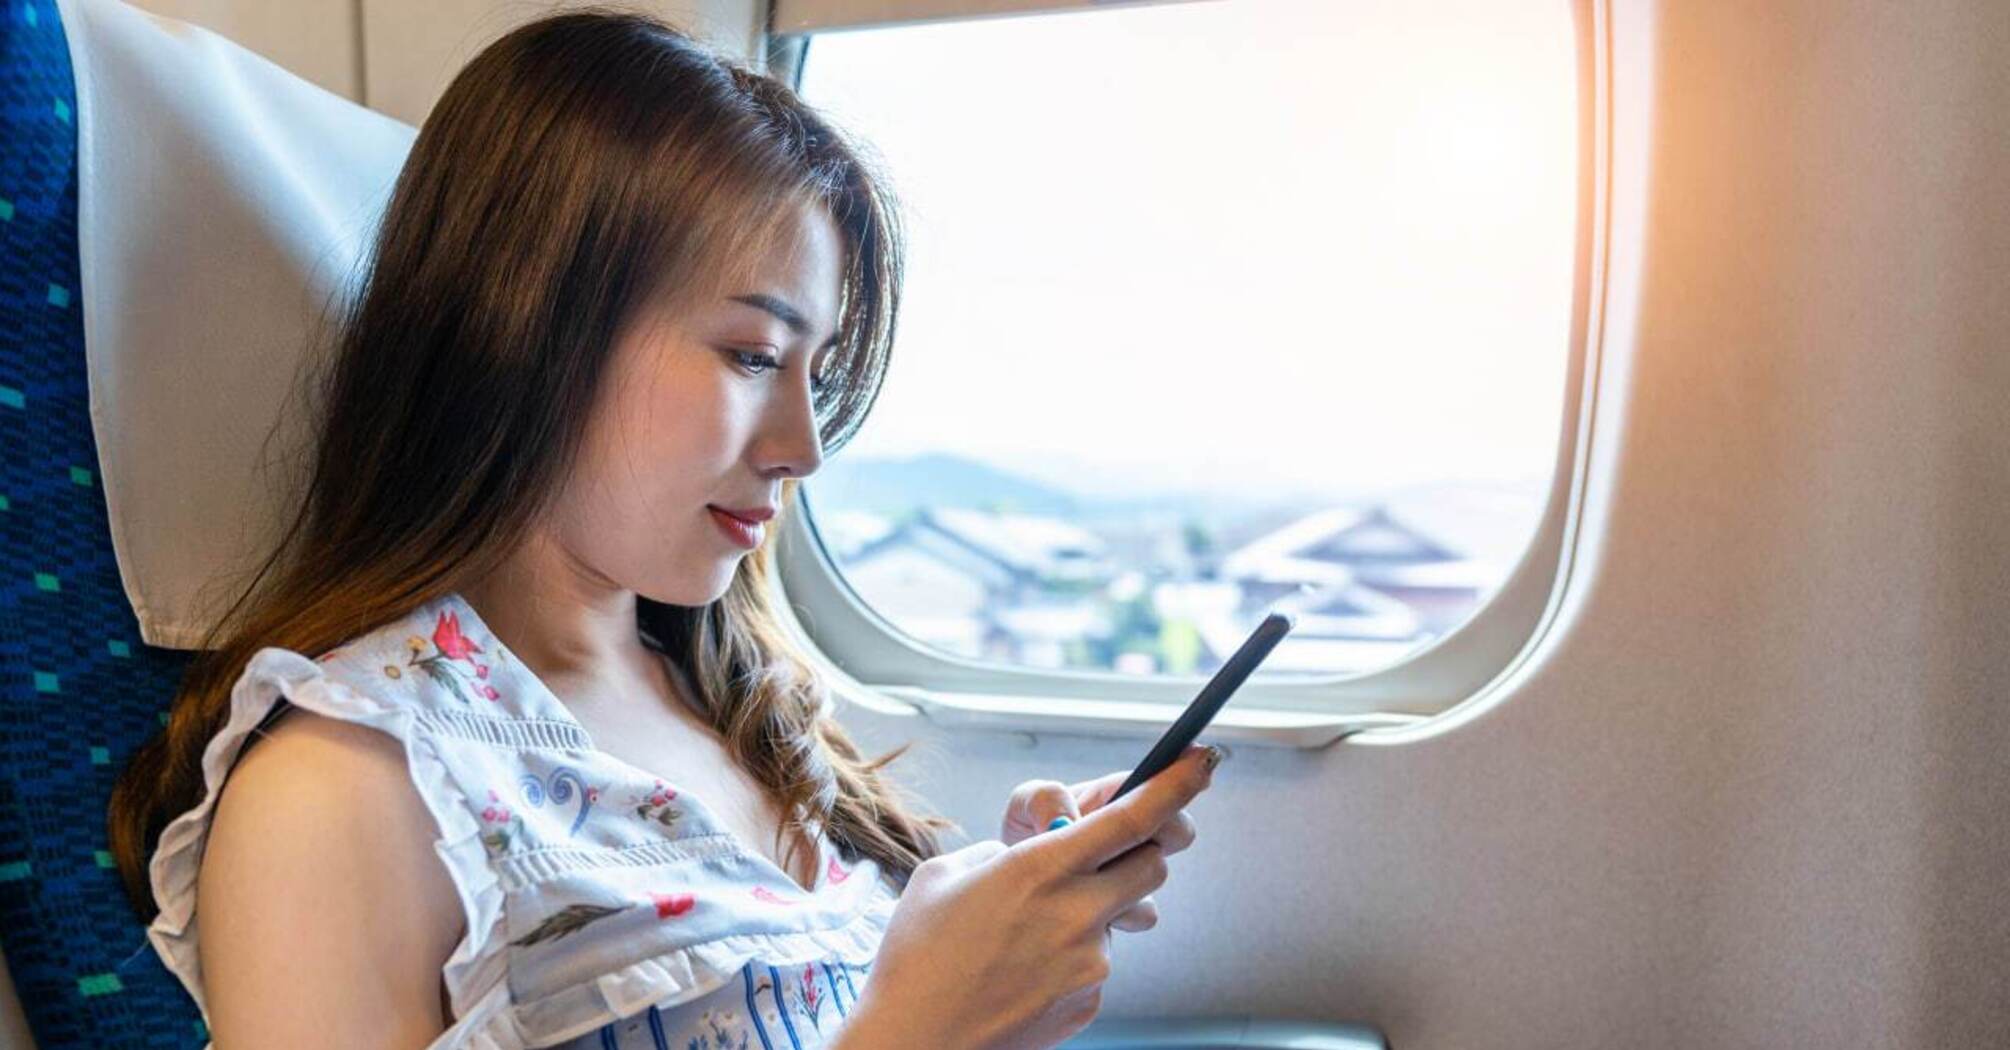 Airplane mode: Why you should turn off your phone during a flight